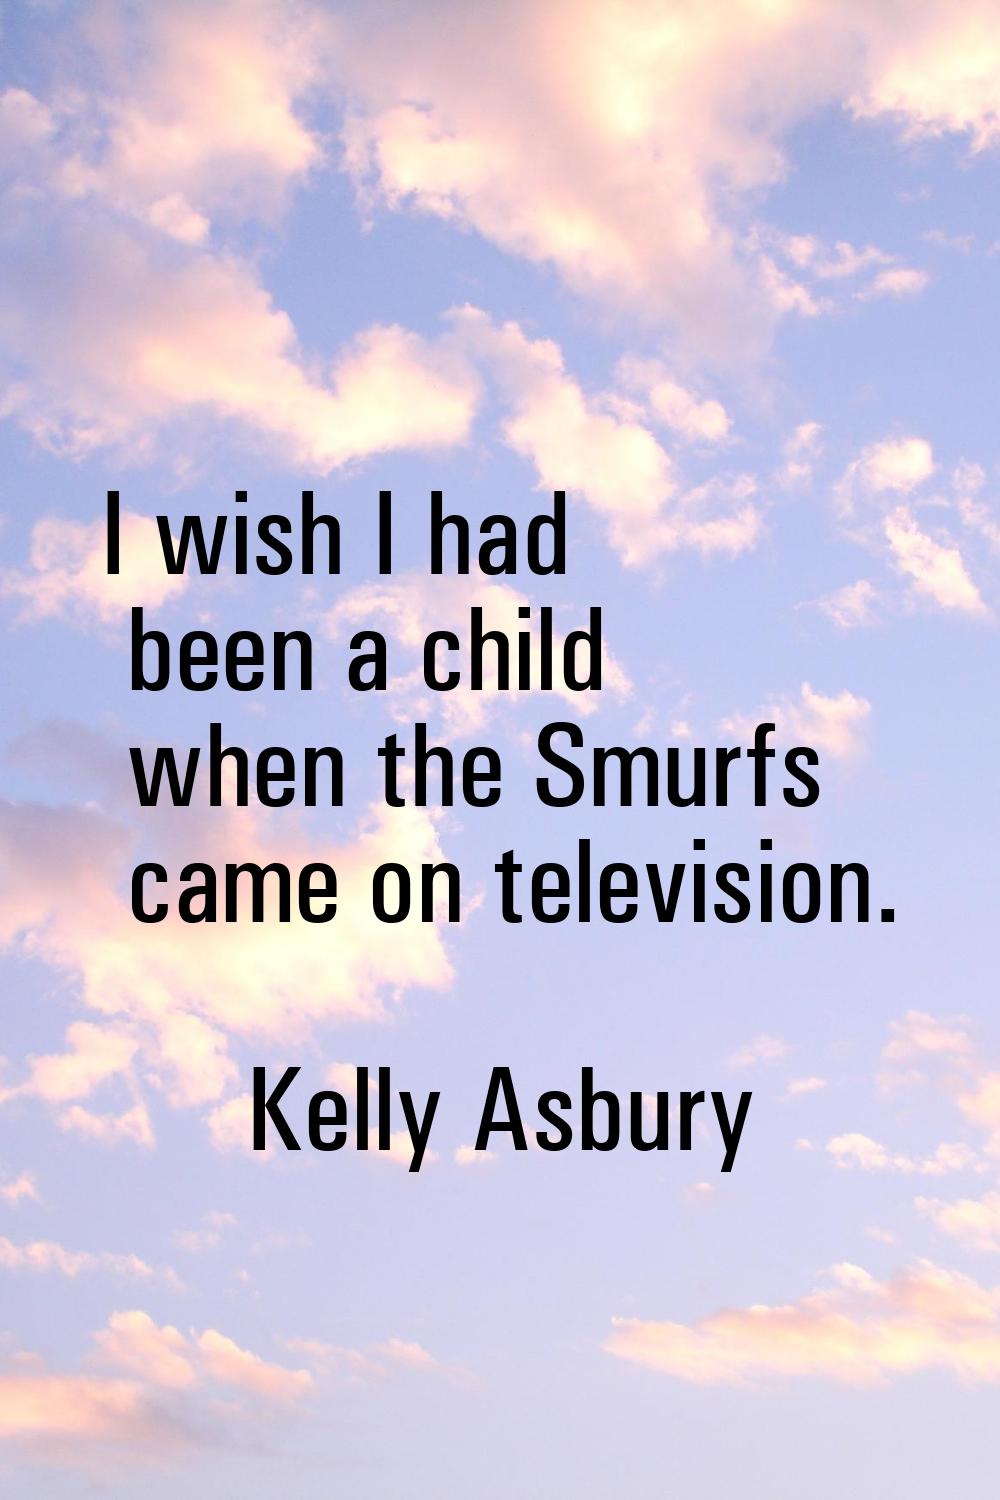 I wish I had been a child when the Smurfs came on television.